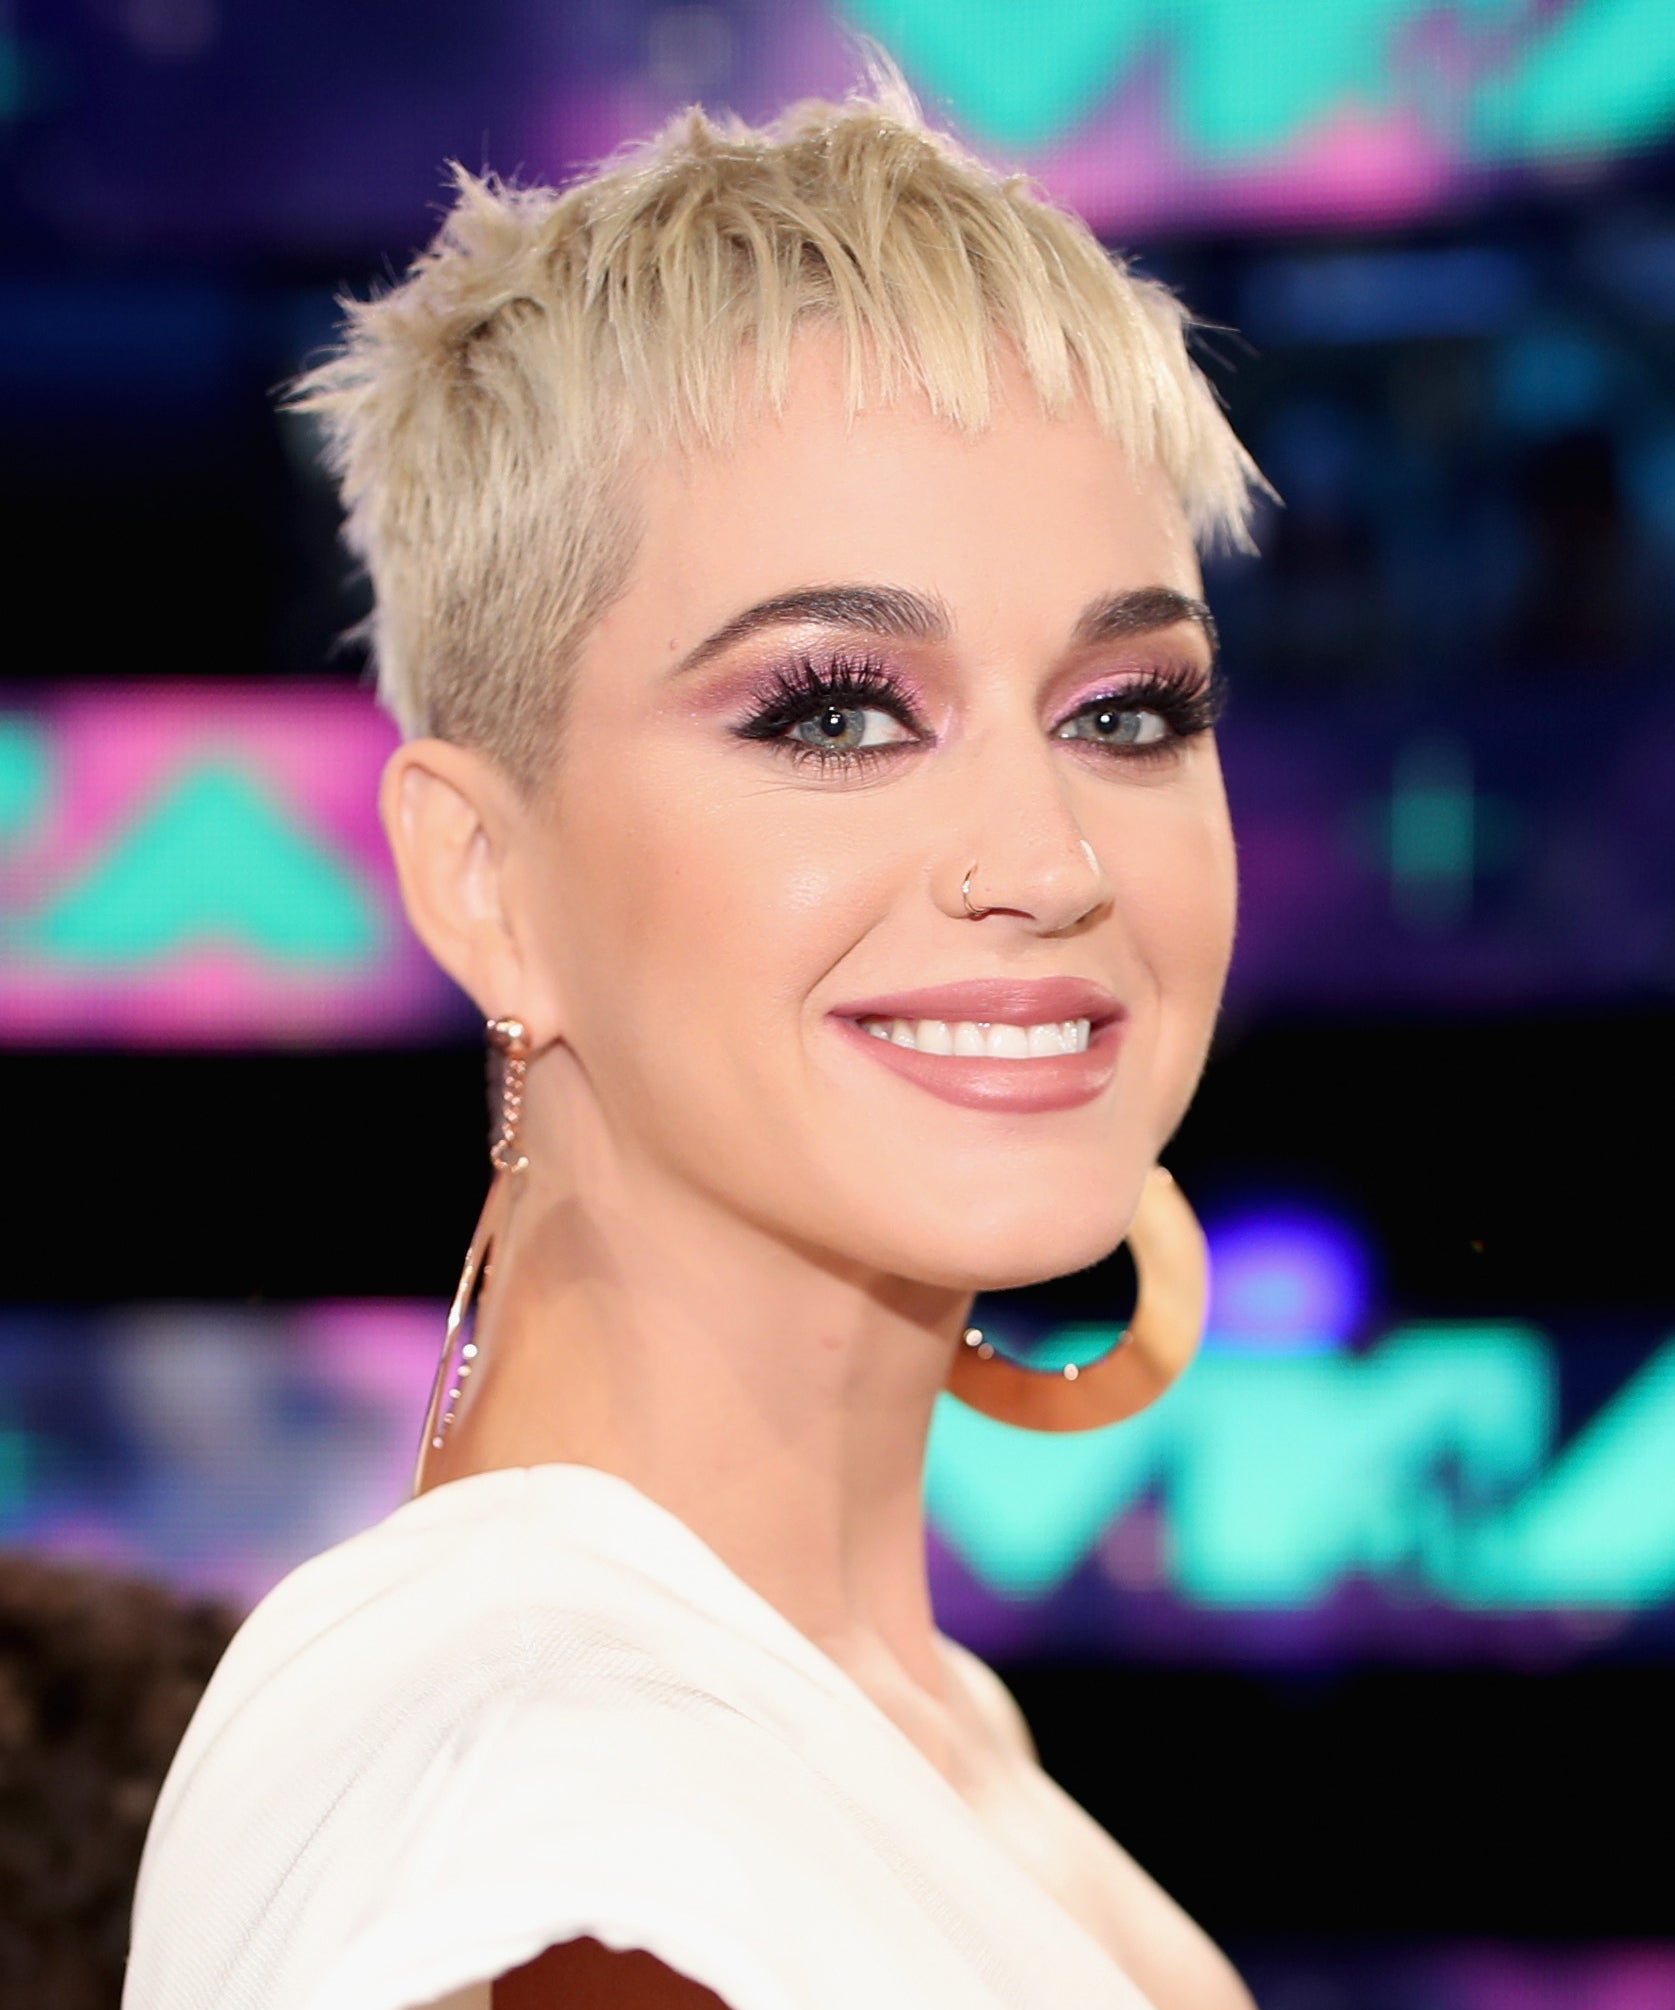 Katy Perry Dyed Hair Dark Brown With Long Extensions